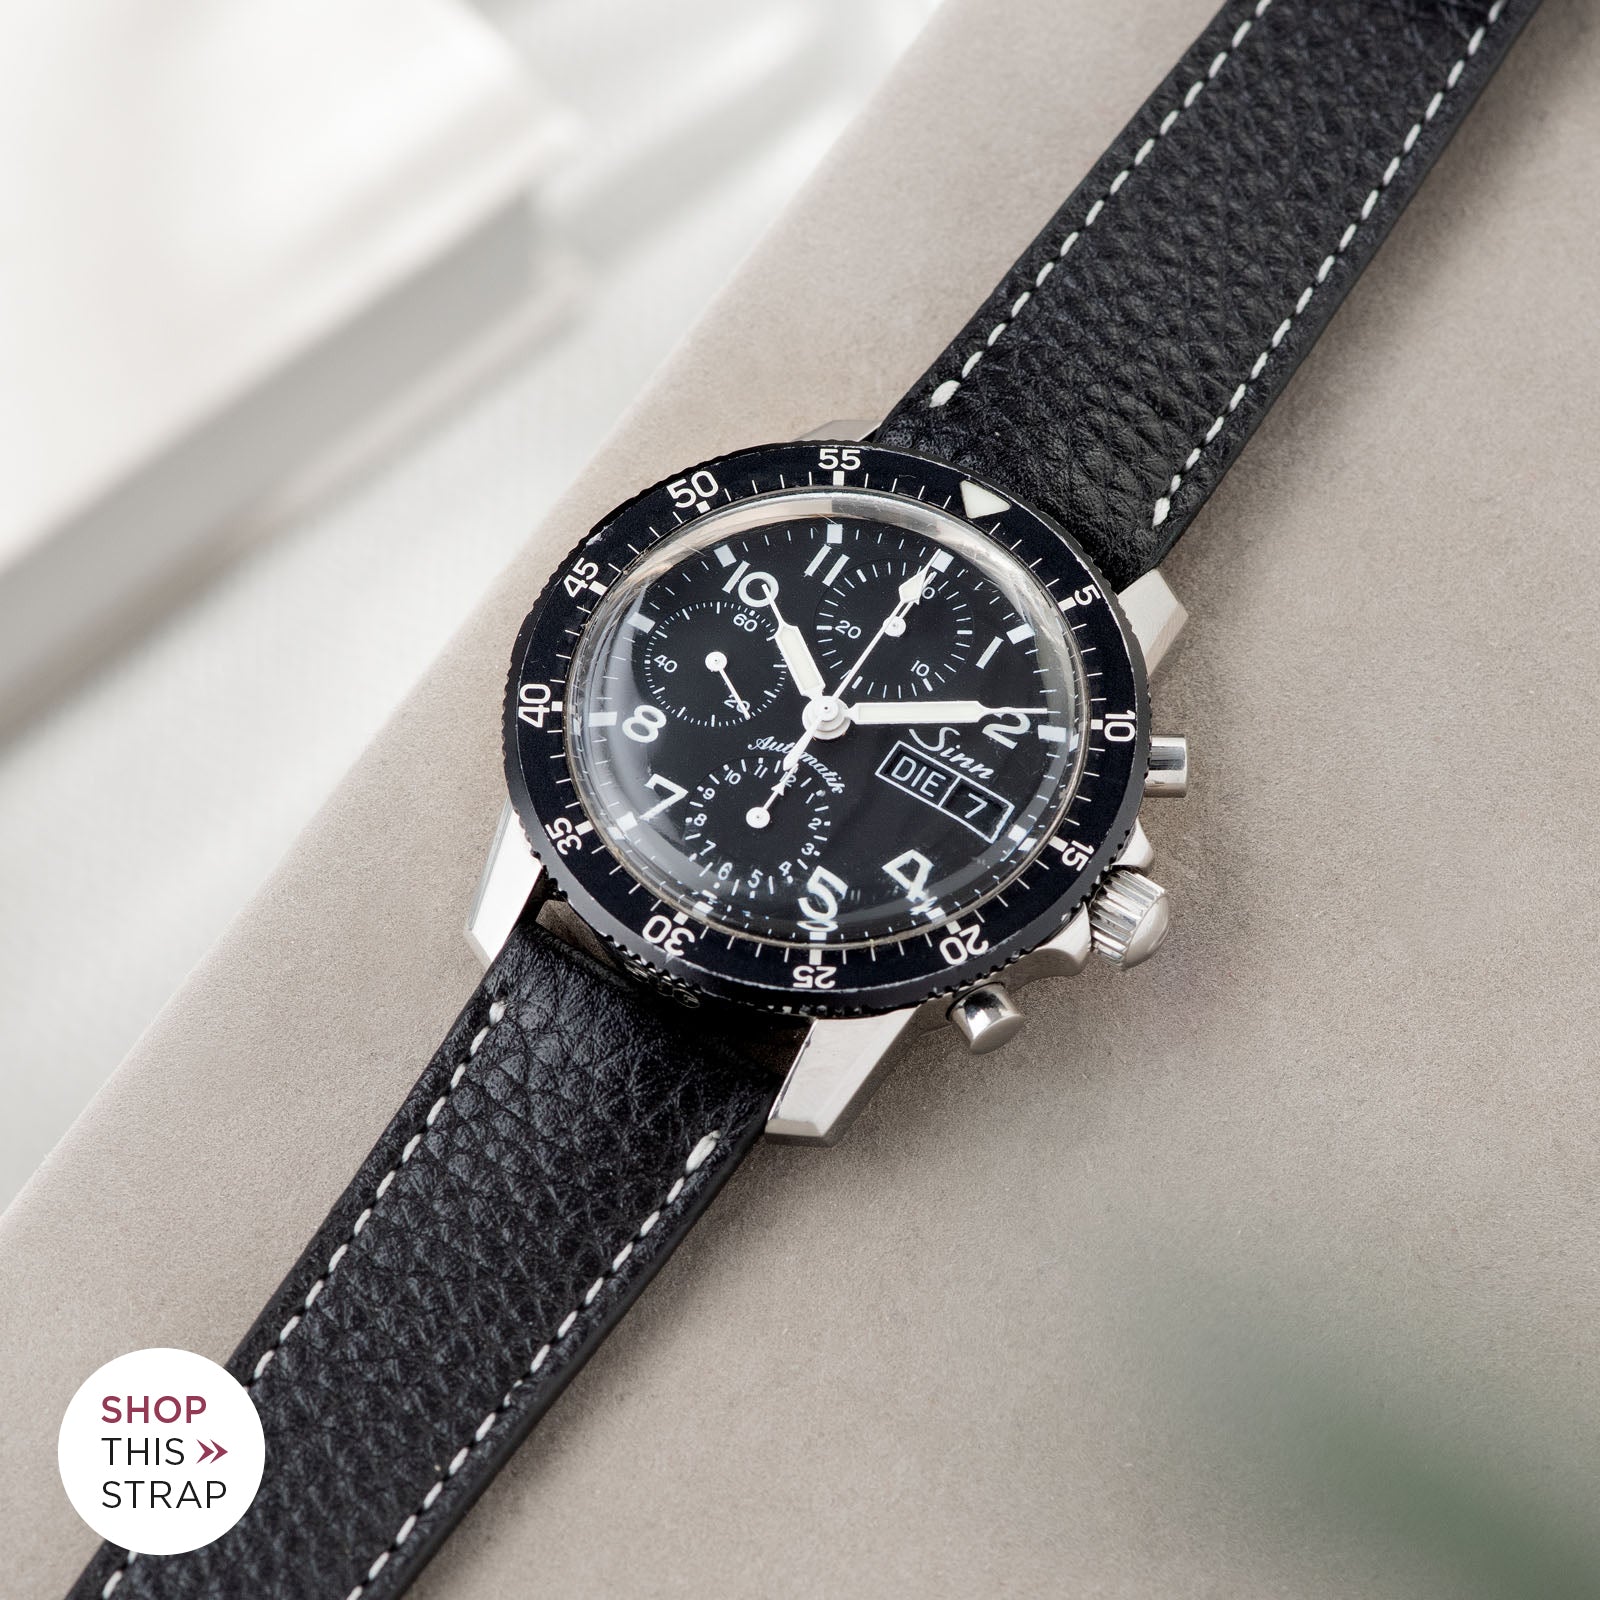 Bulang and Sons_Strap Guide_Sinn 103St Flieder Chronograph_Rich Black Creme Stitch Leather Watch Strap